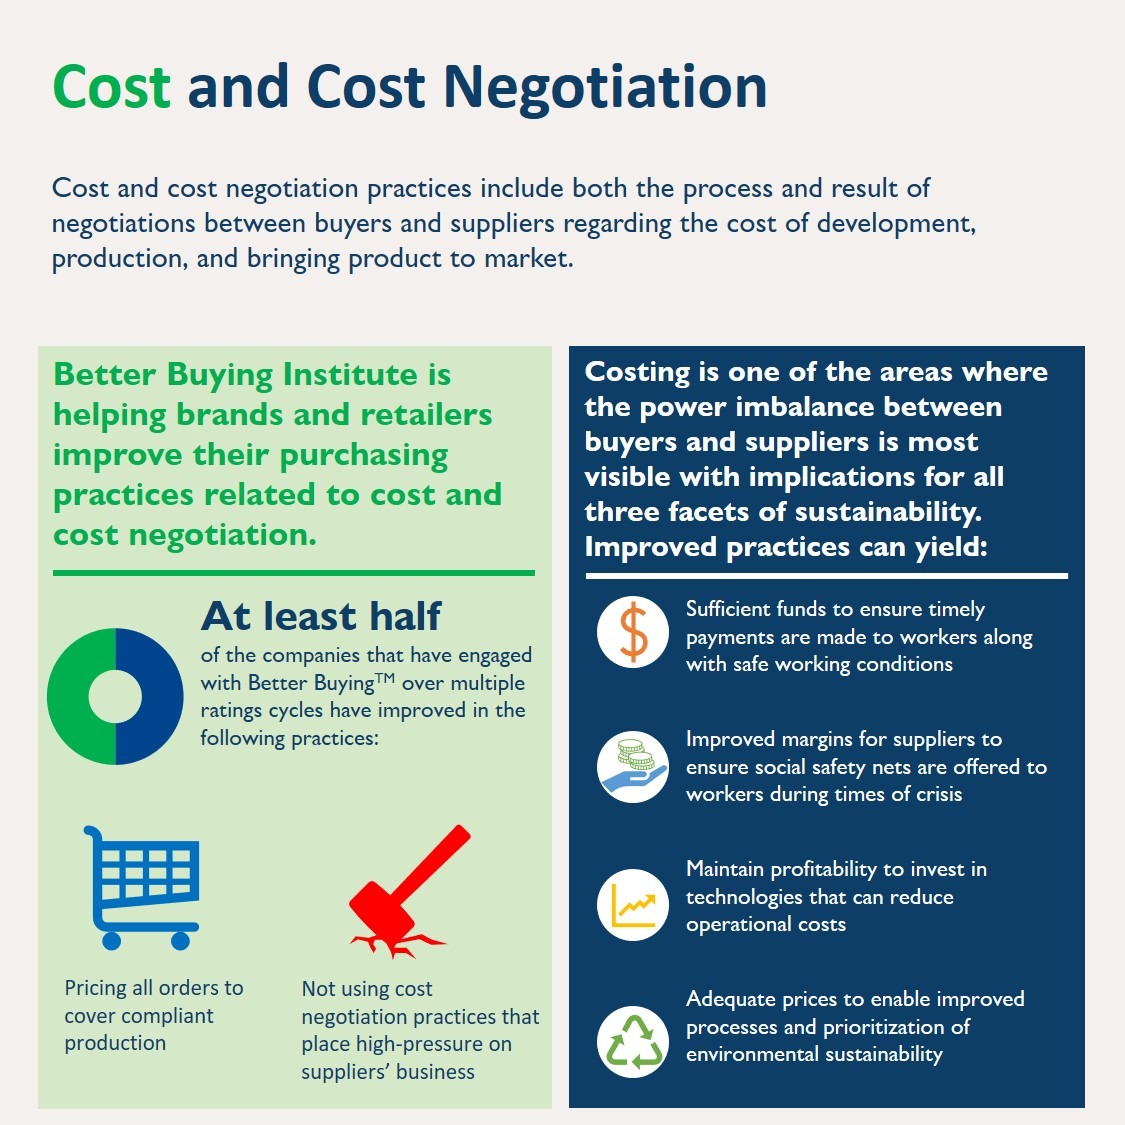 Cost and Cost Negotiation